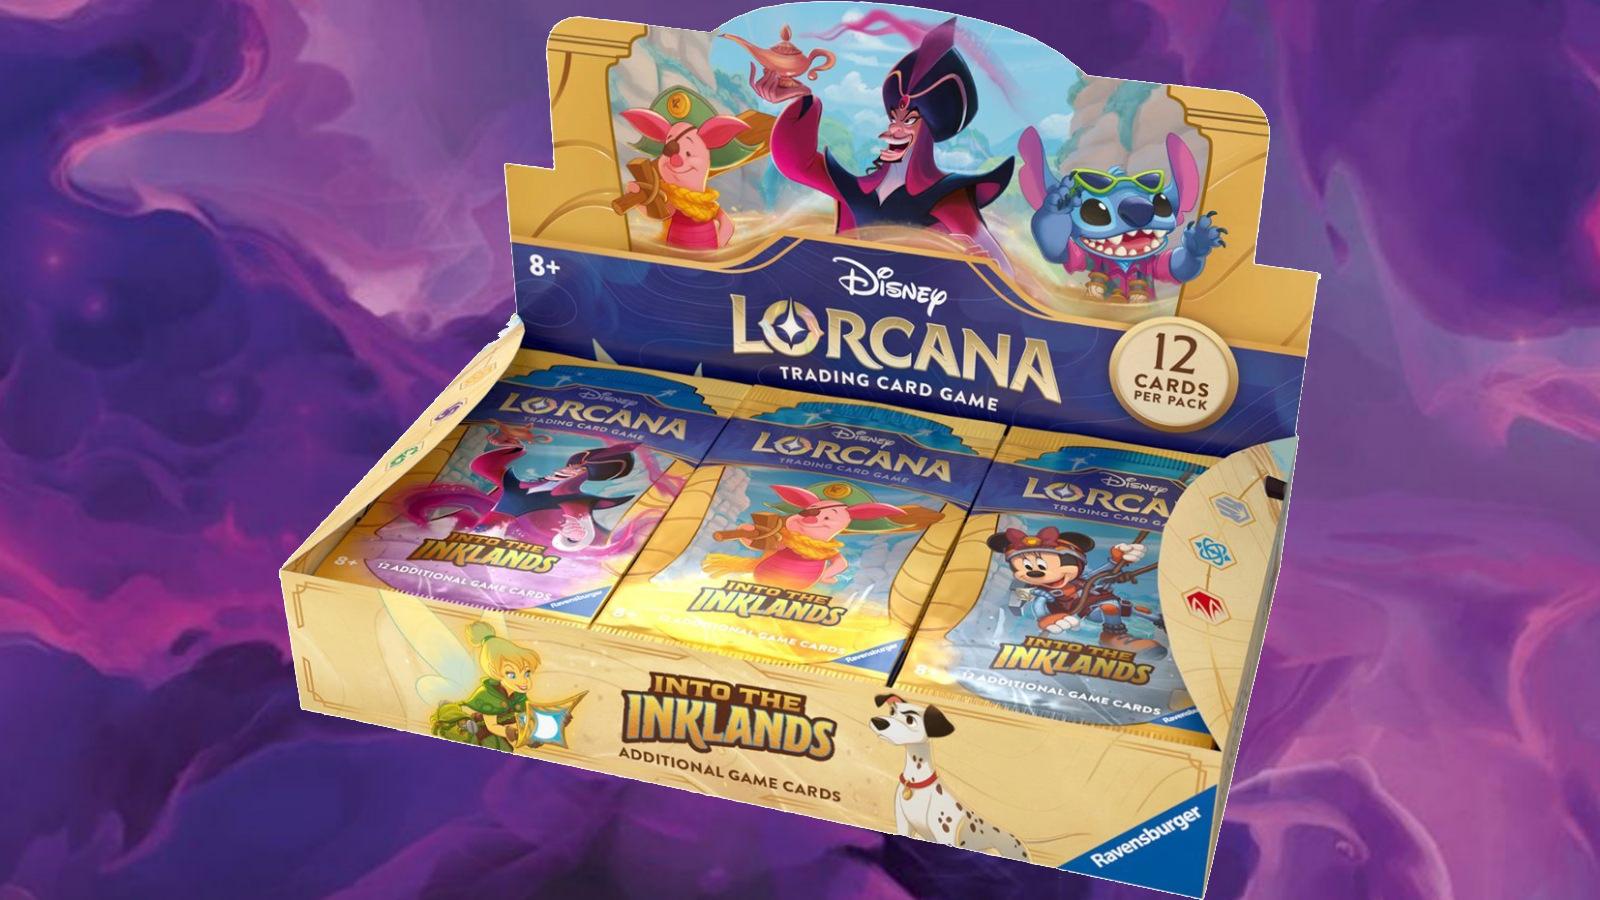 Disney Lorcana Into the Inklands booster box